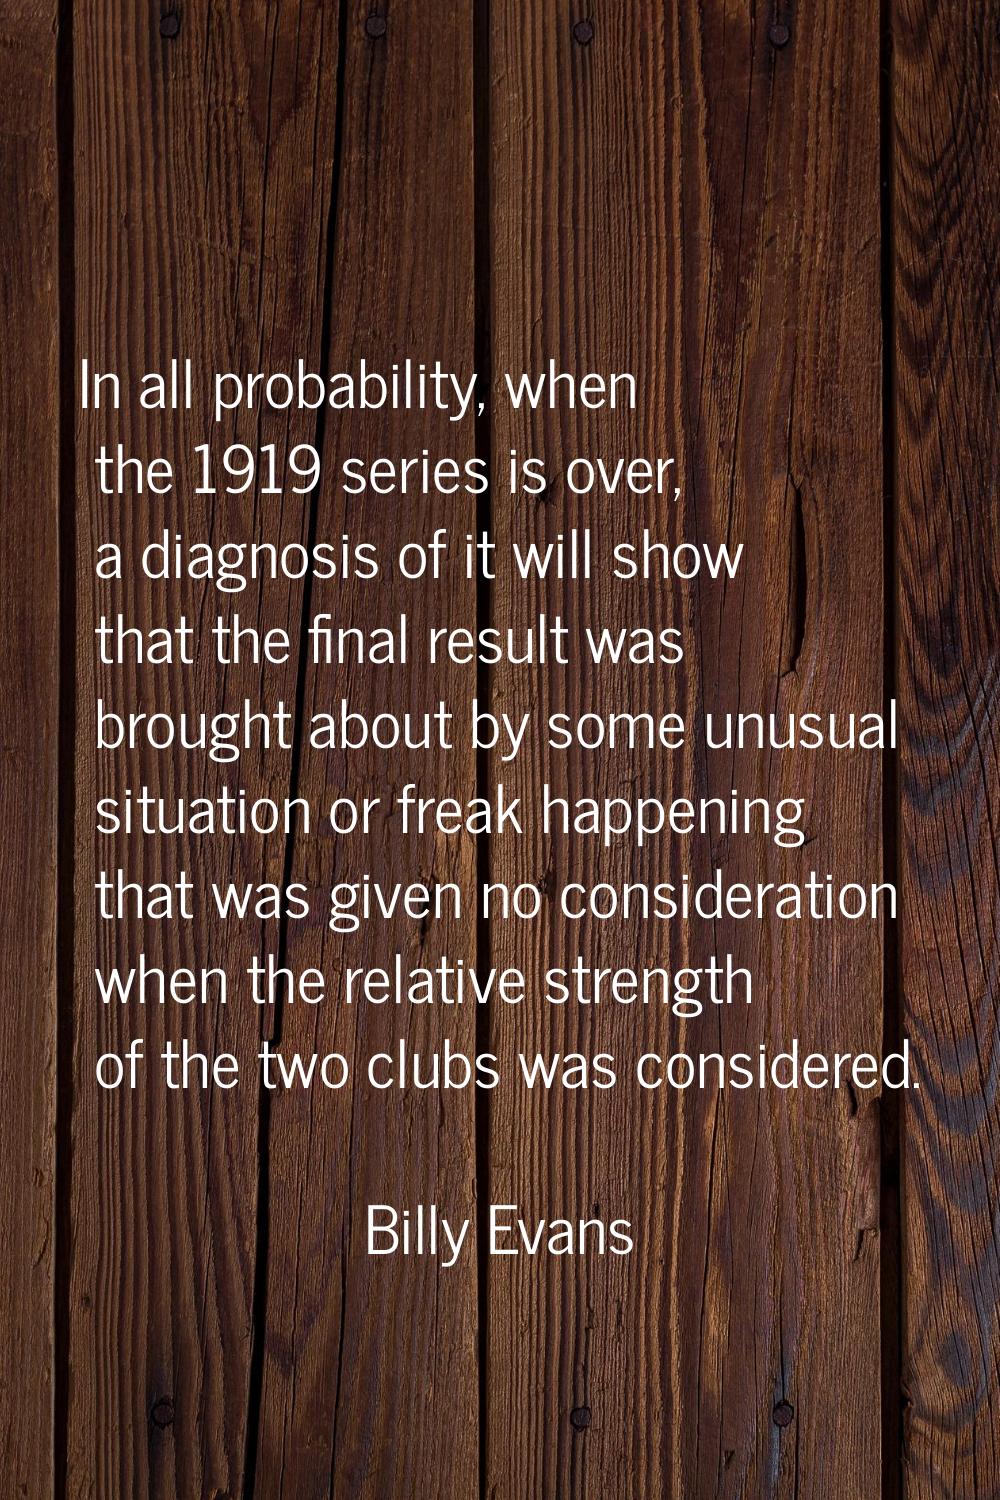 In all probability, when the 1919 series is over, a diagnosis of it will show that the final result